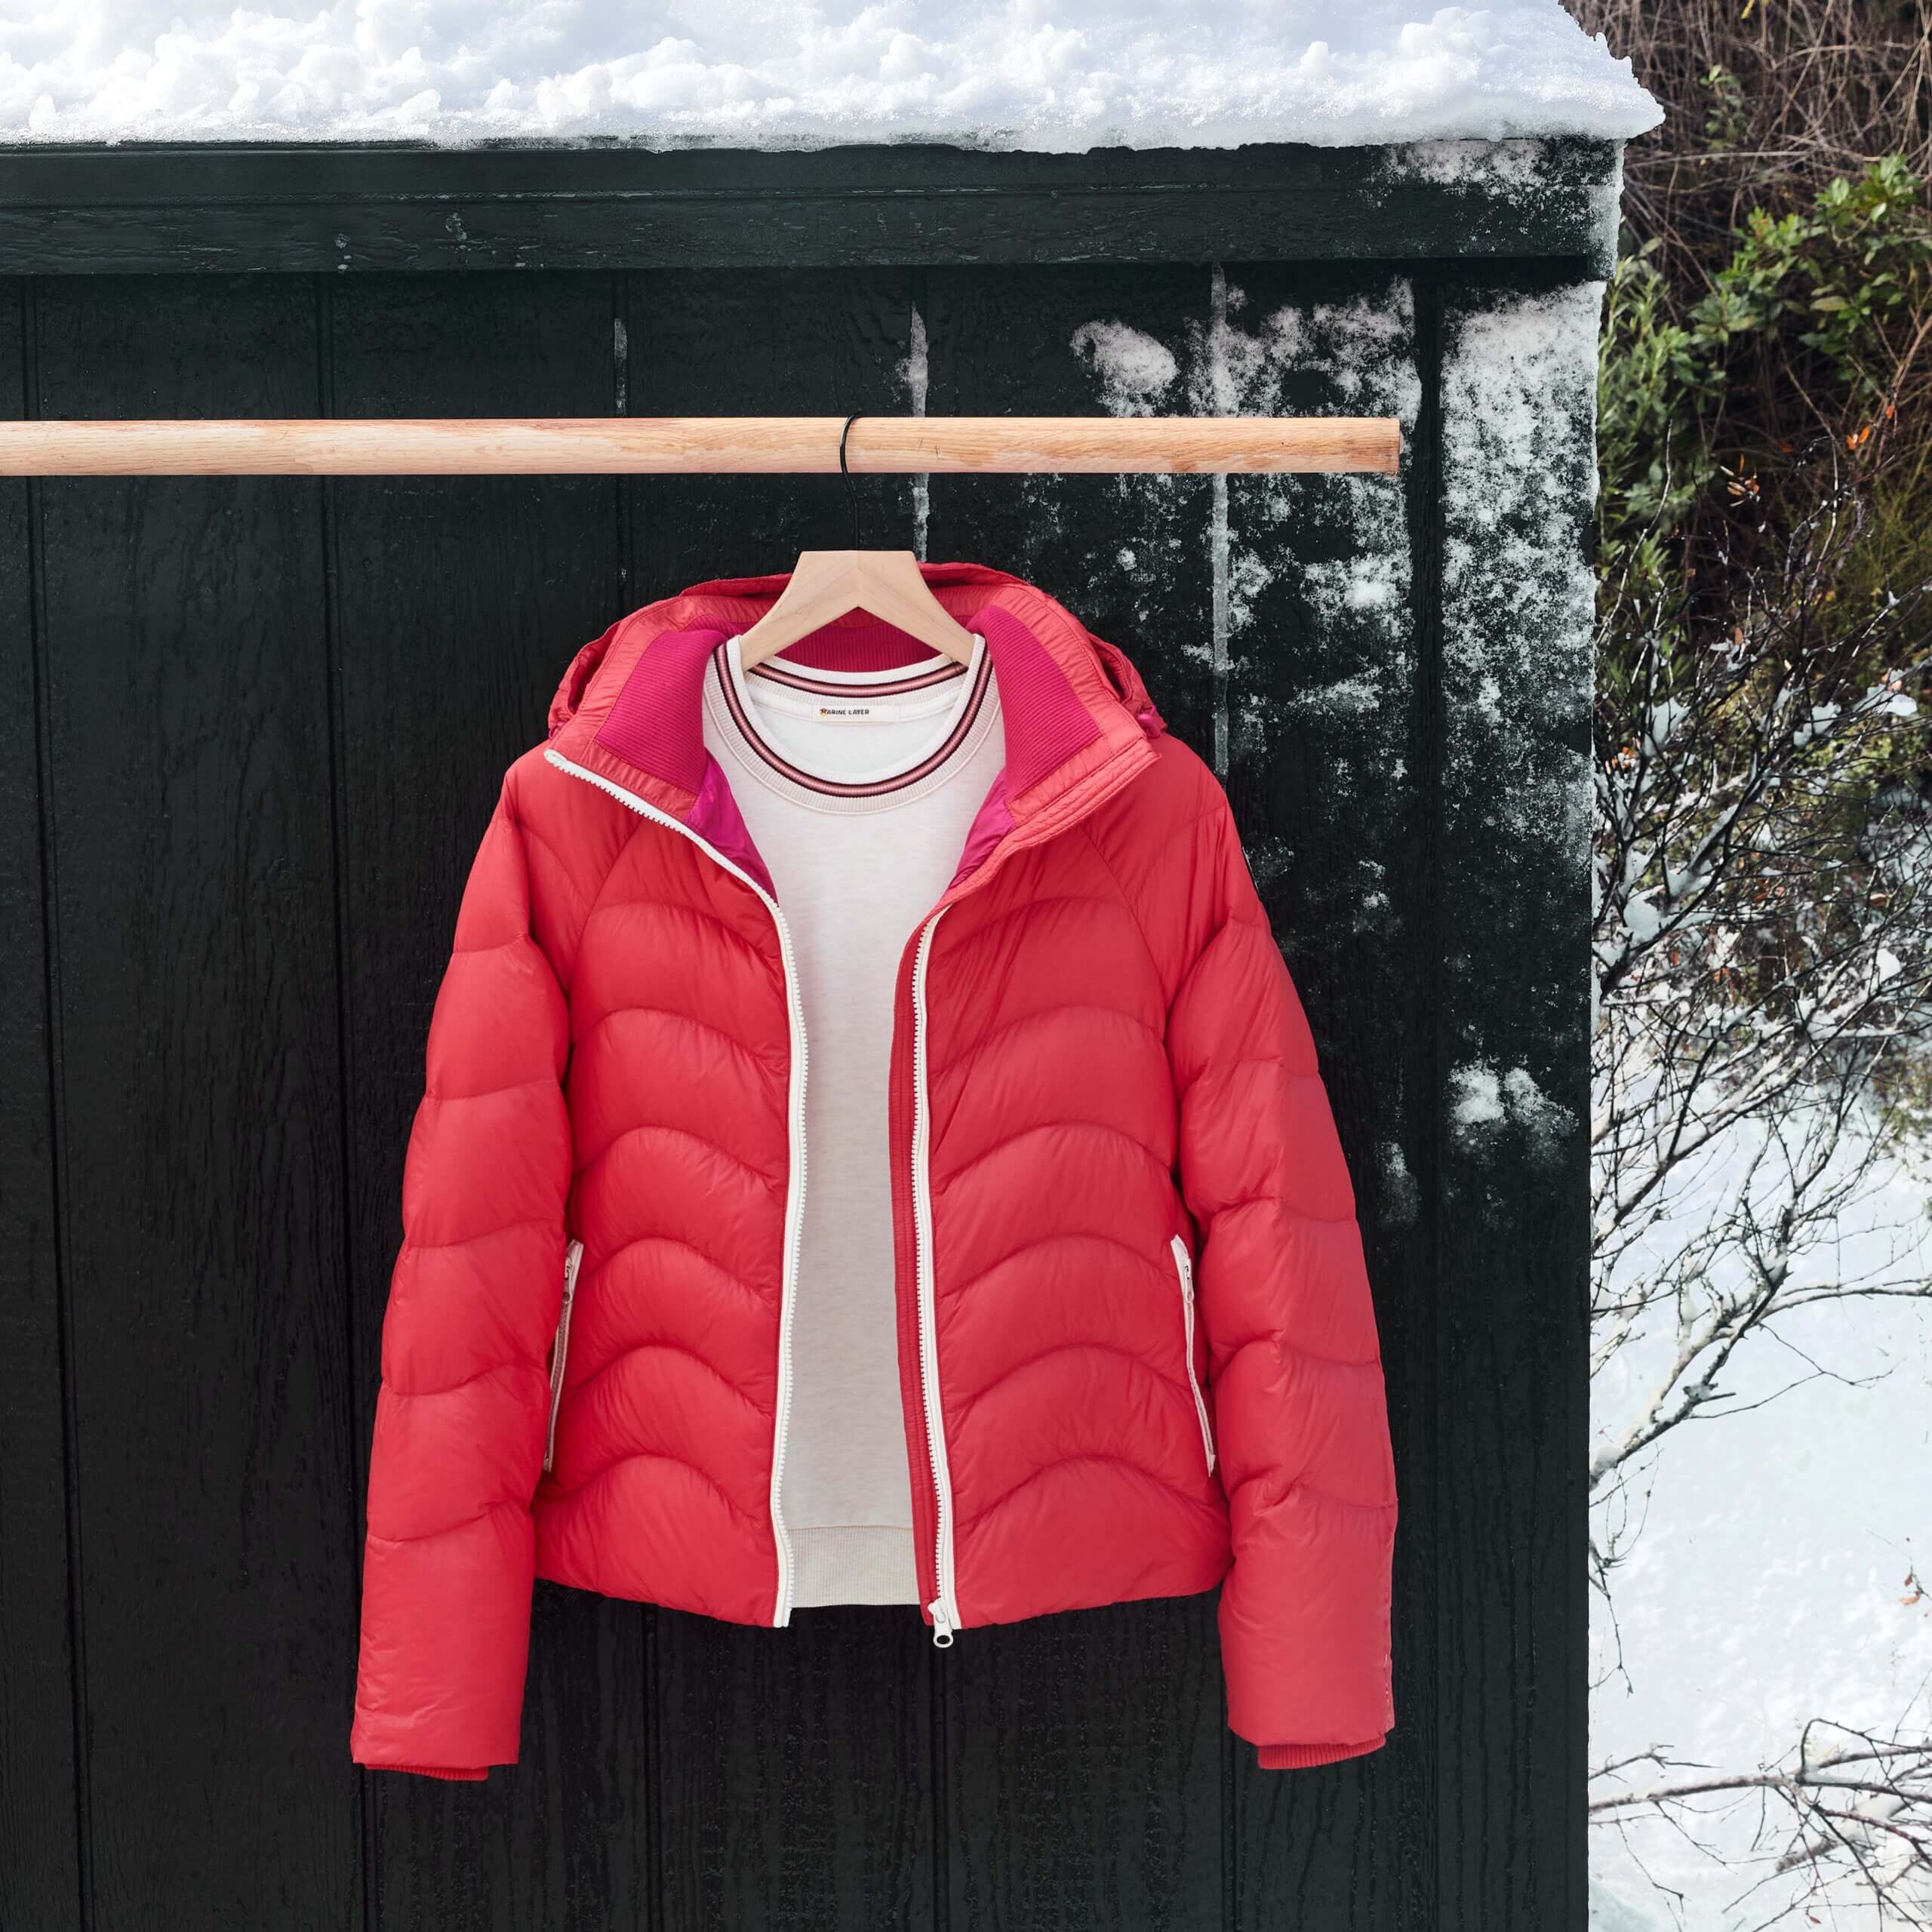 Stitch Fix women's red puffer jacket over white sweatshirt hanging on wooden pole outside of snowy cabin. 